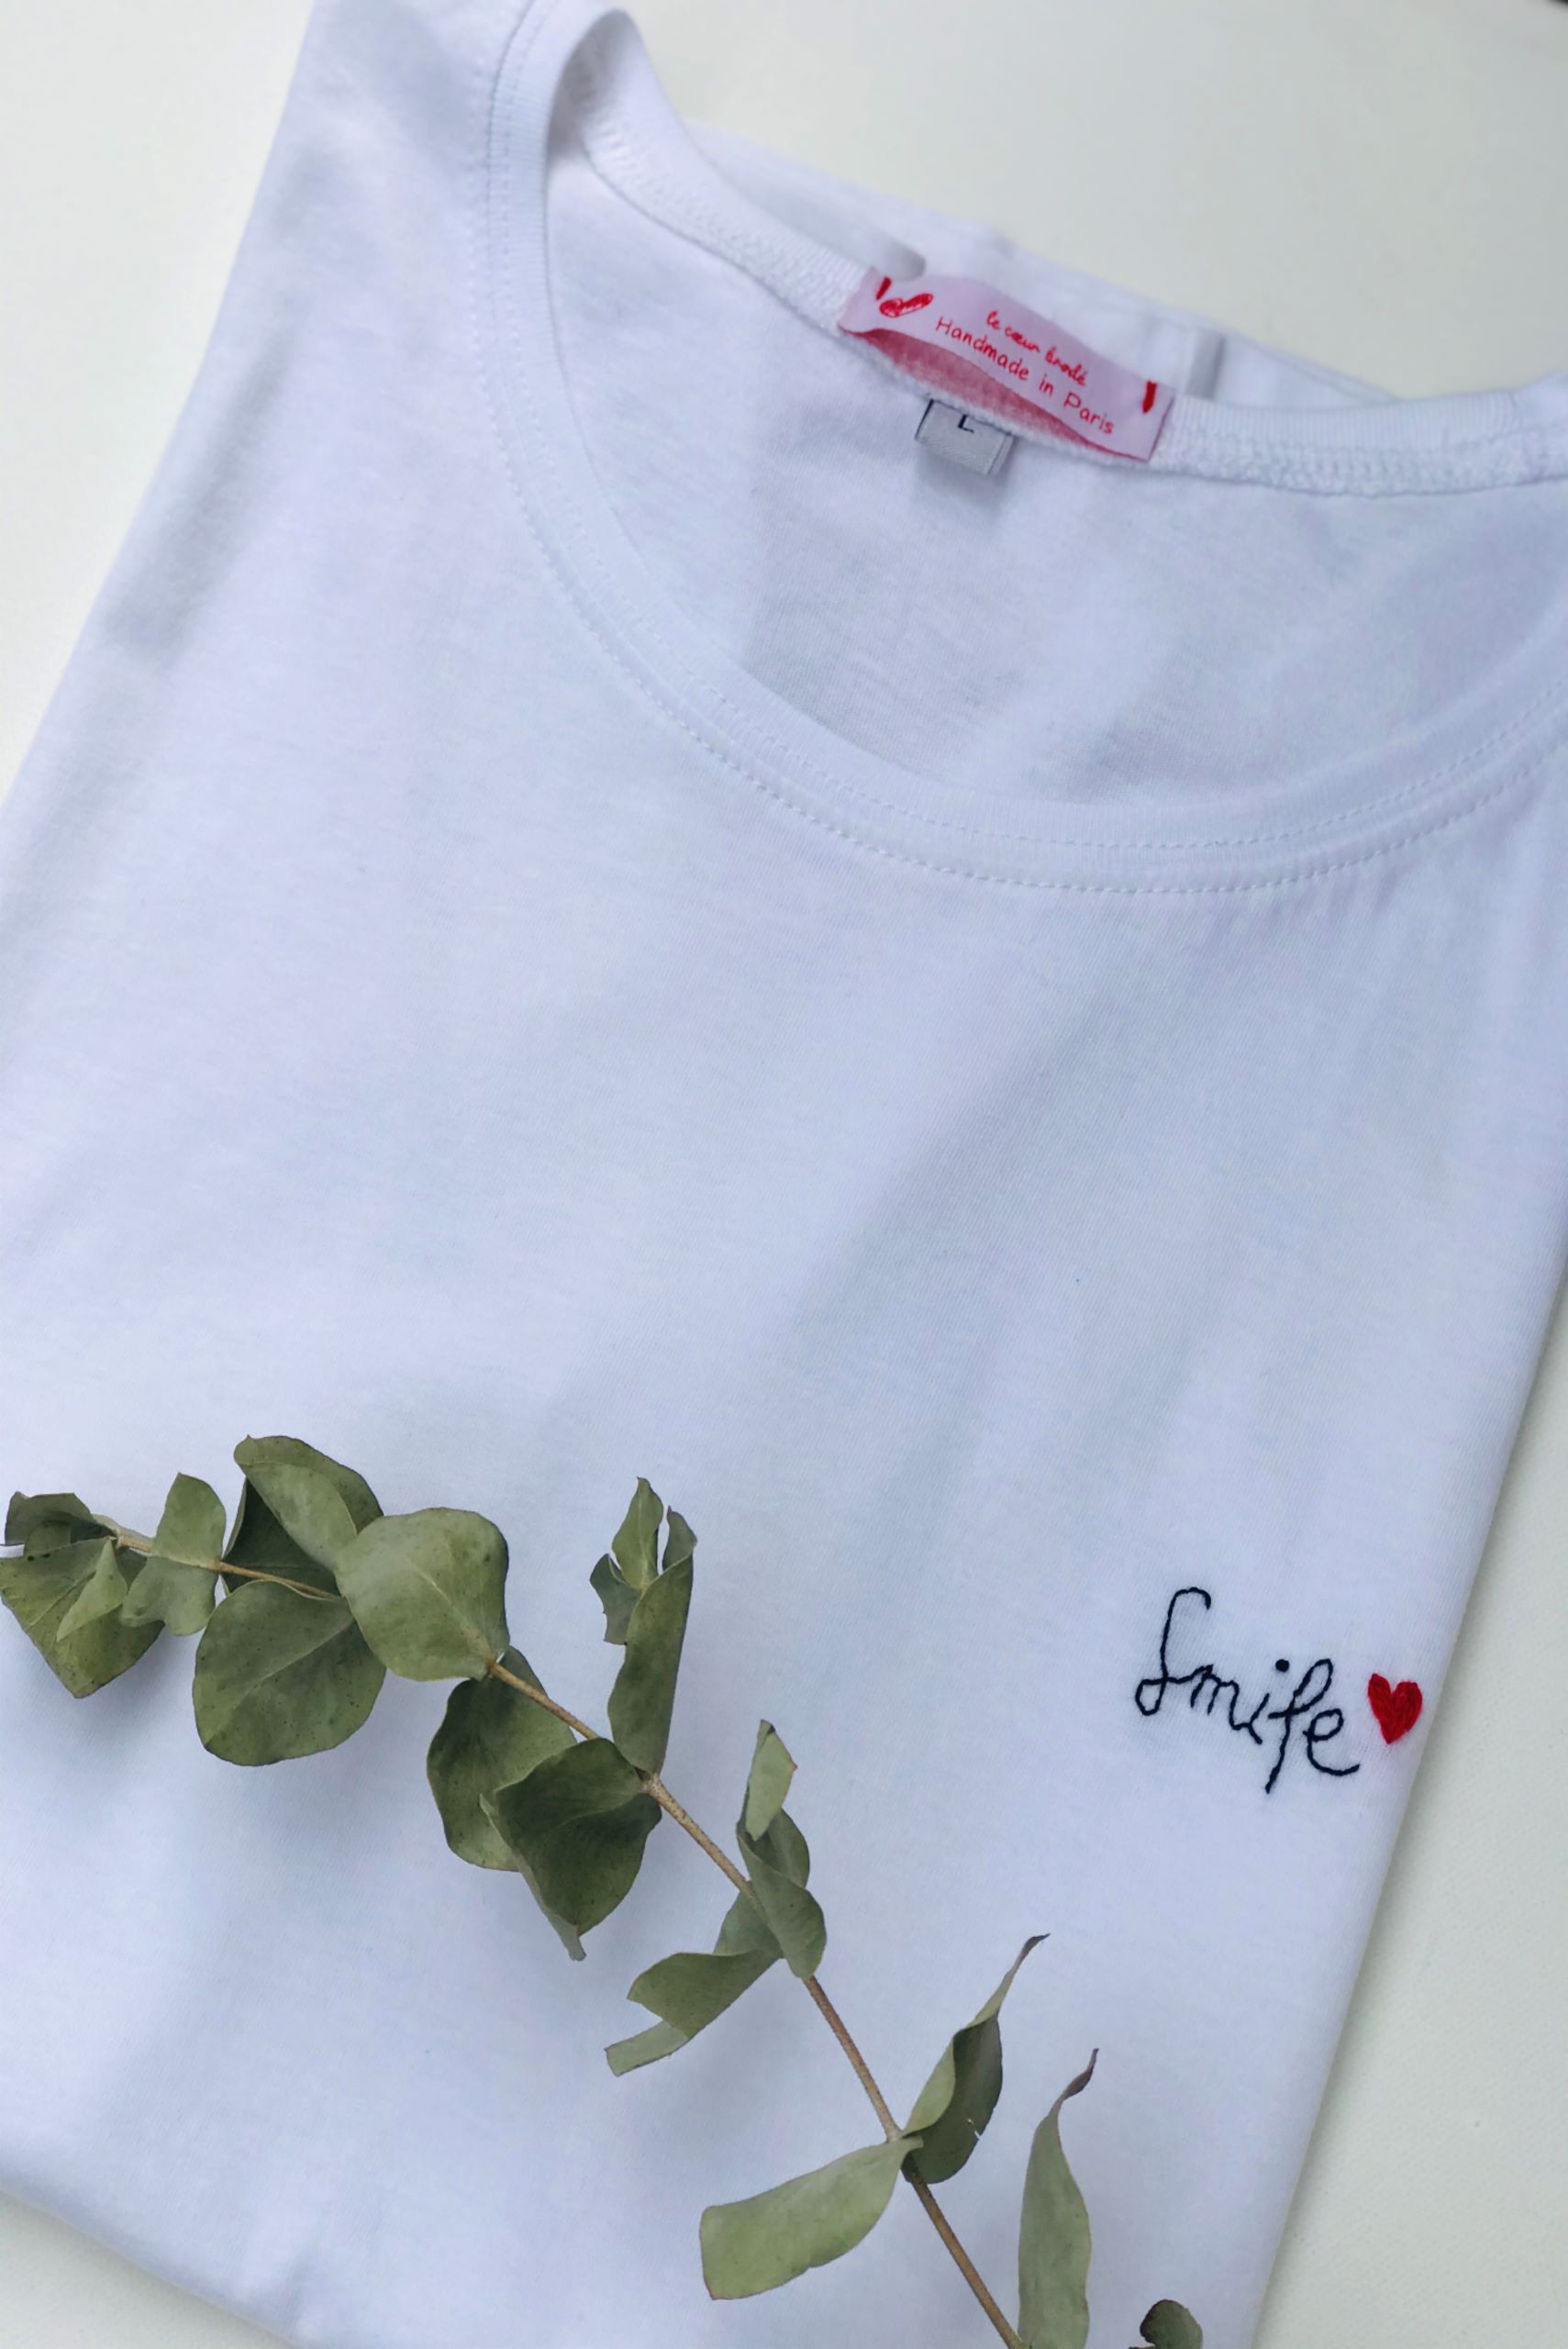 https://shopping-for-happiness.com/wp-content/uploads/2021/02/smile-spring-summer-oversized-white-hand-embroidered-tshirt.jpg